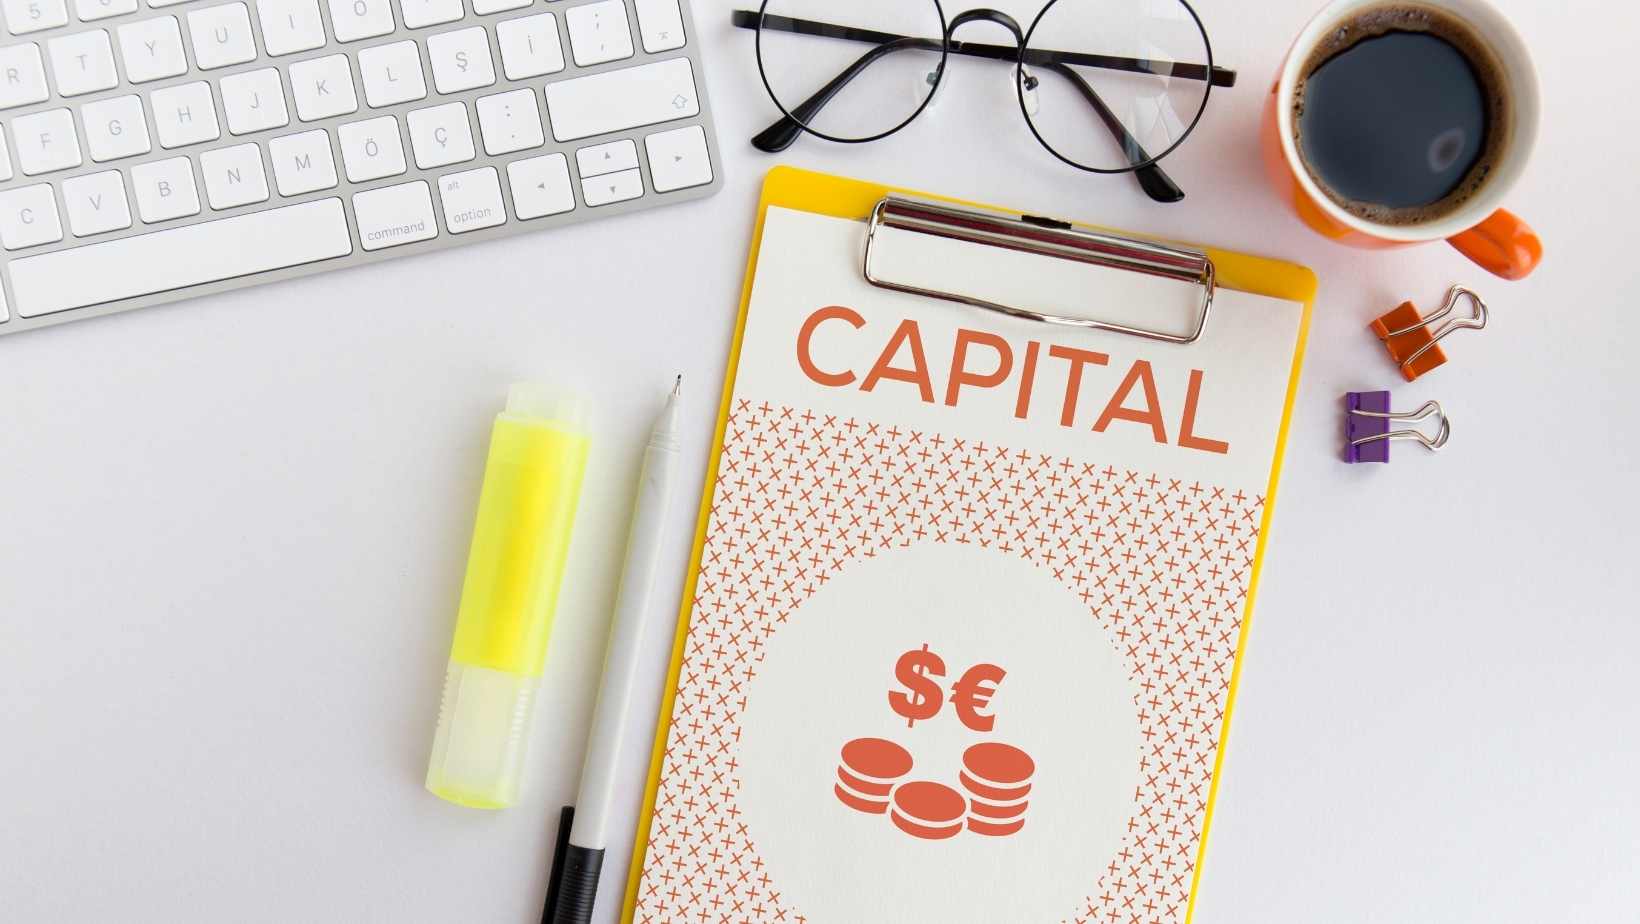 Capital - 7 accounting Term every accountant must know!